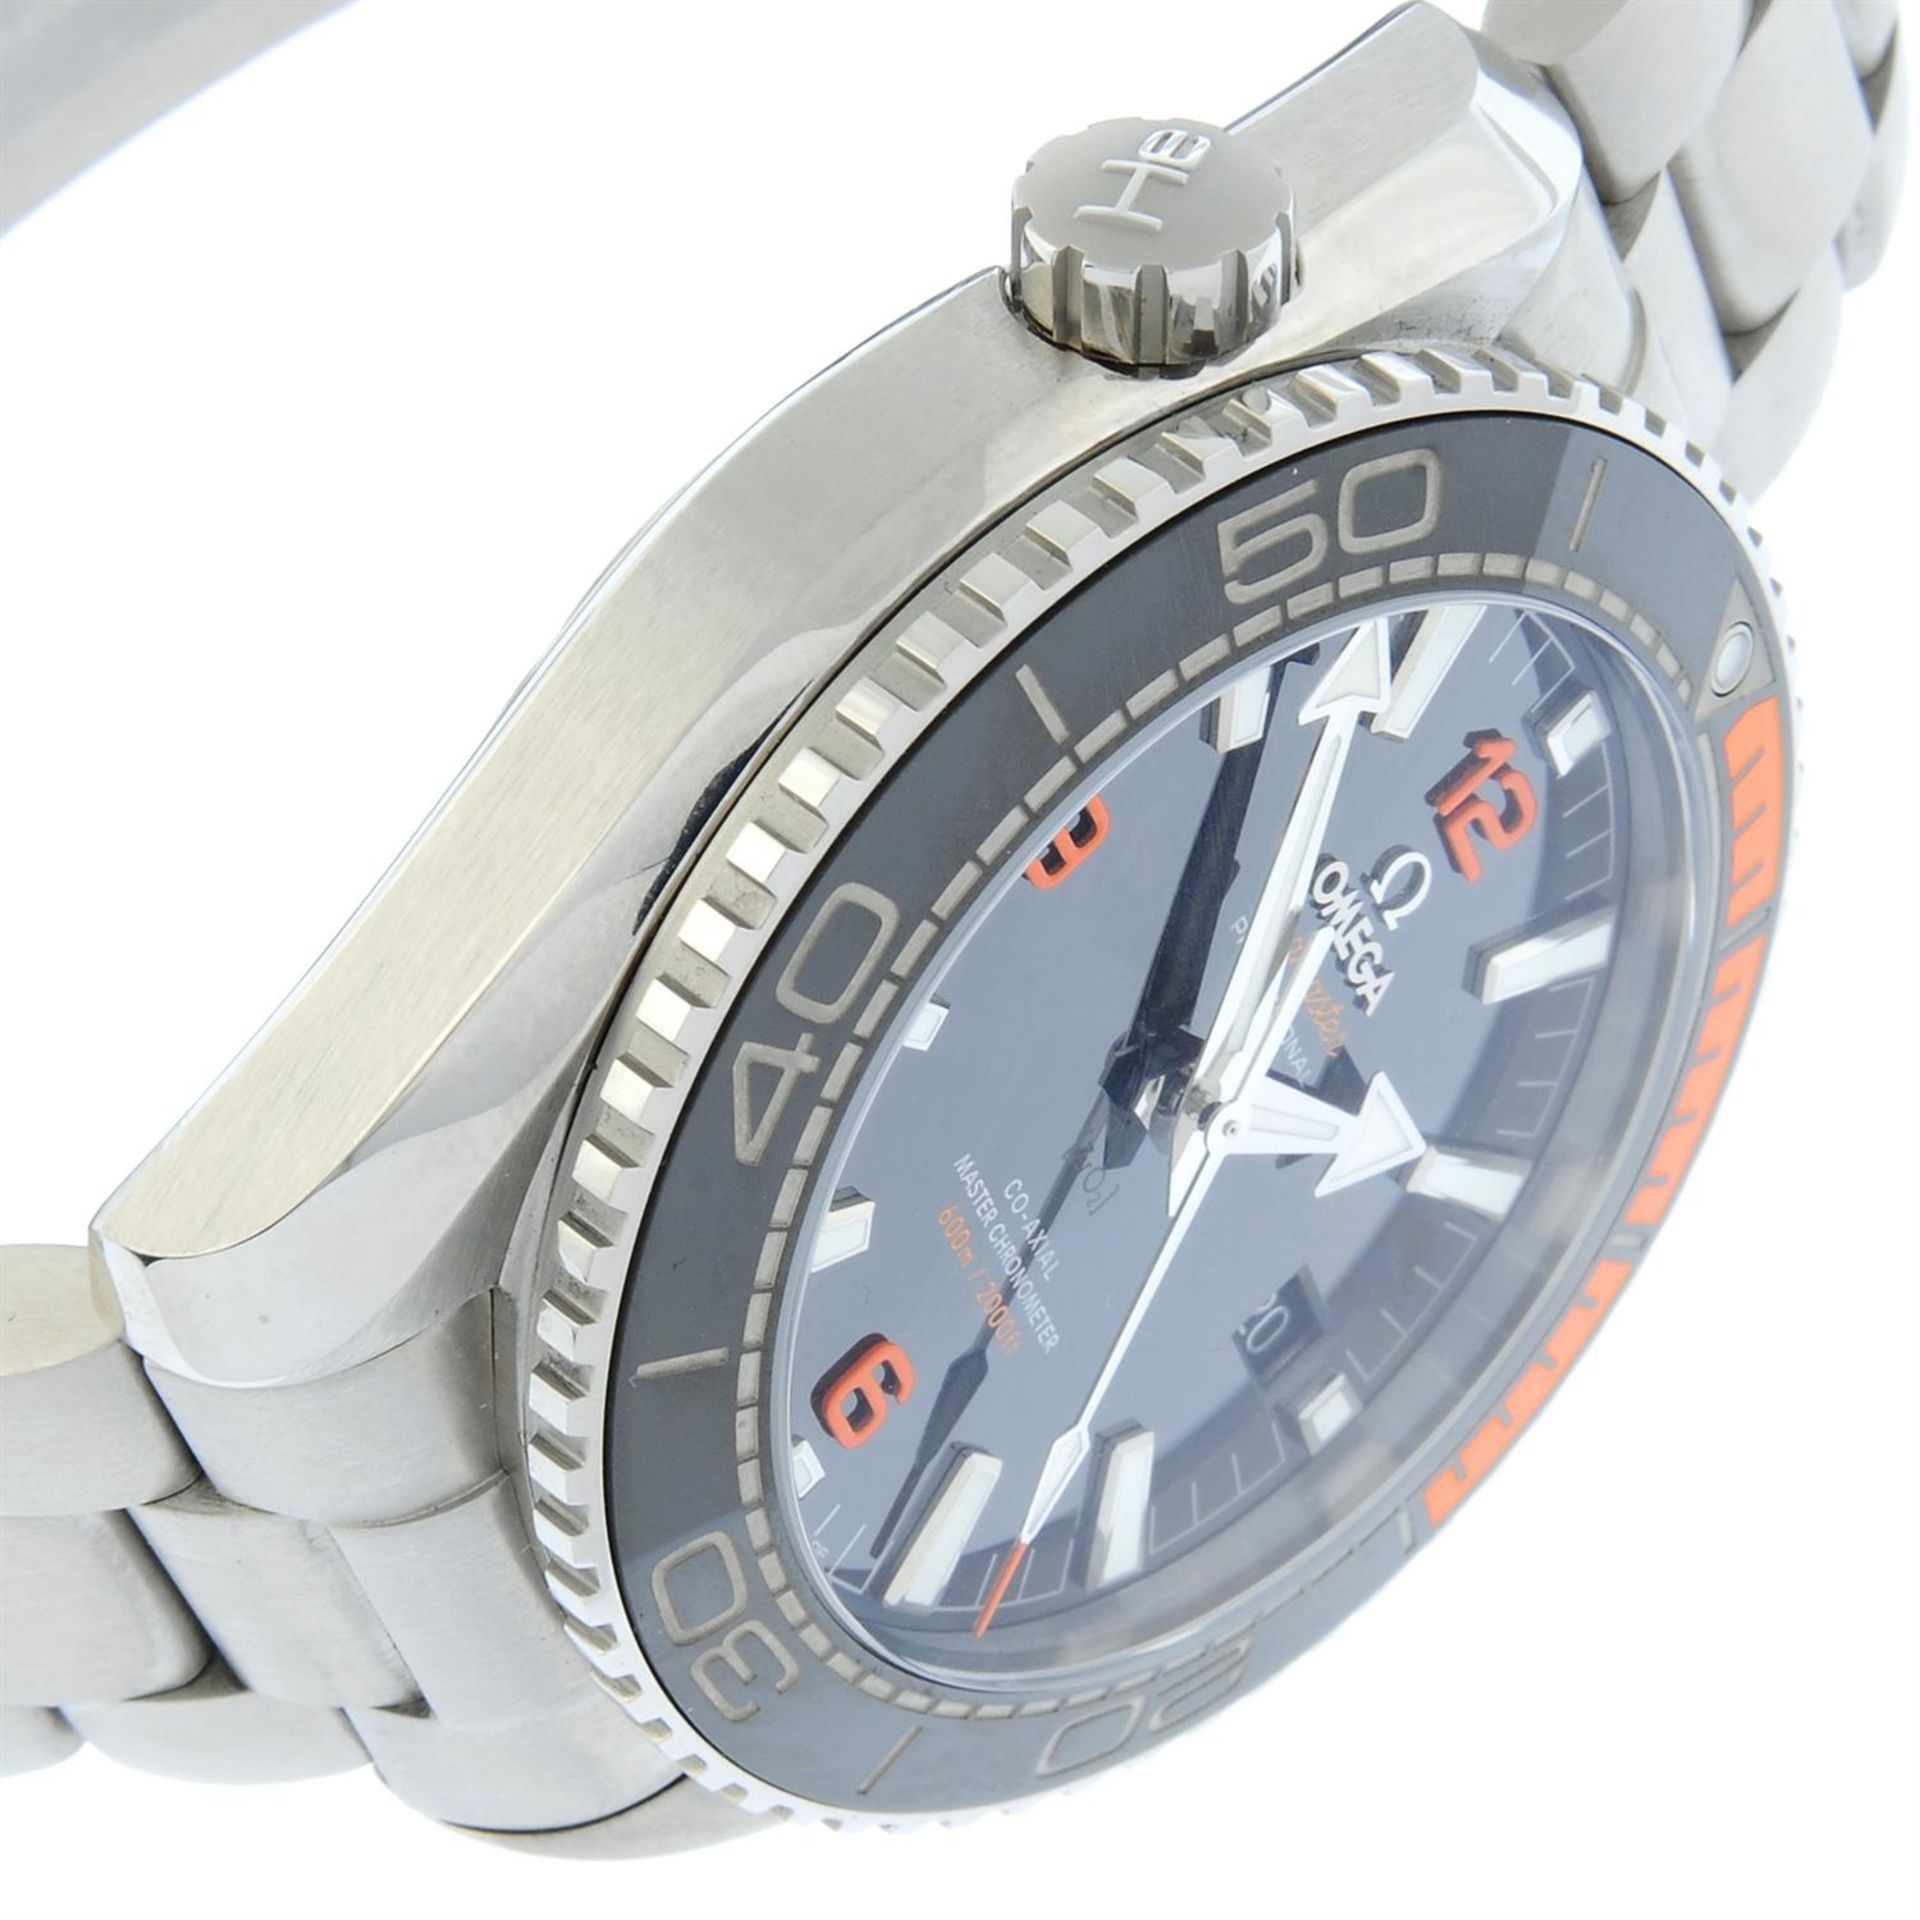 Omega - a Seamaster Planet Ocean Co-Axial bracelet watch, 44mm. - Image 4 of 7